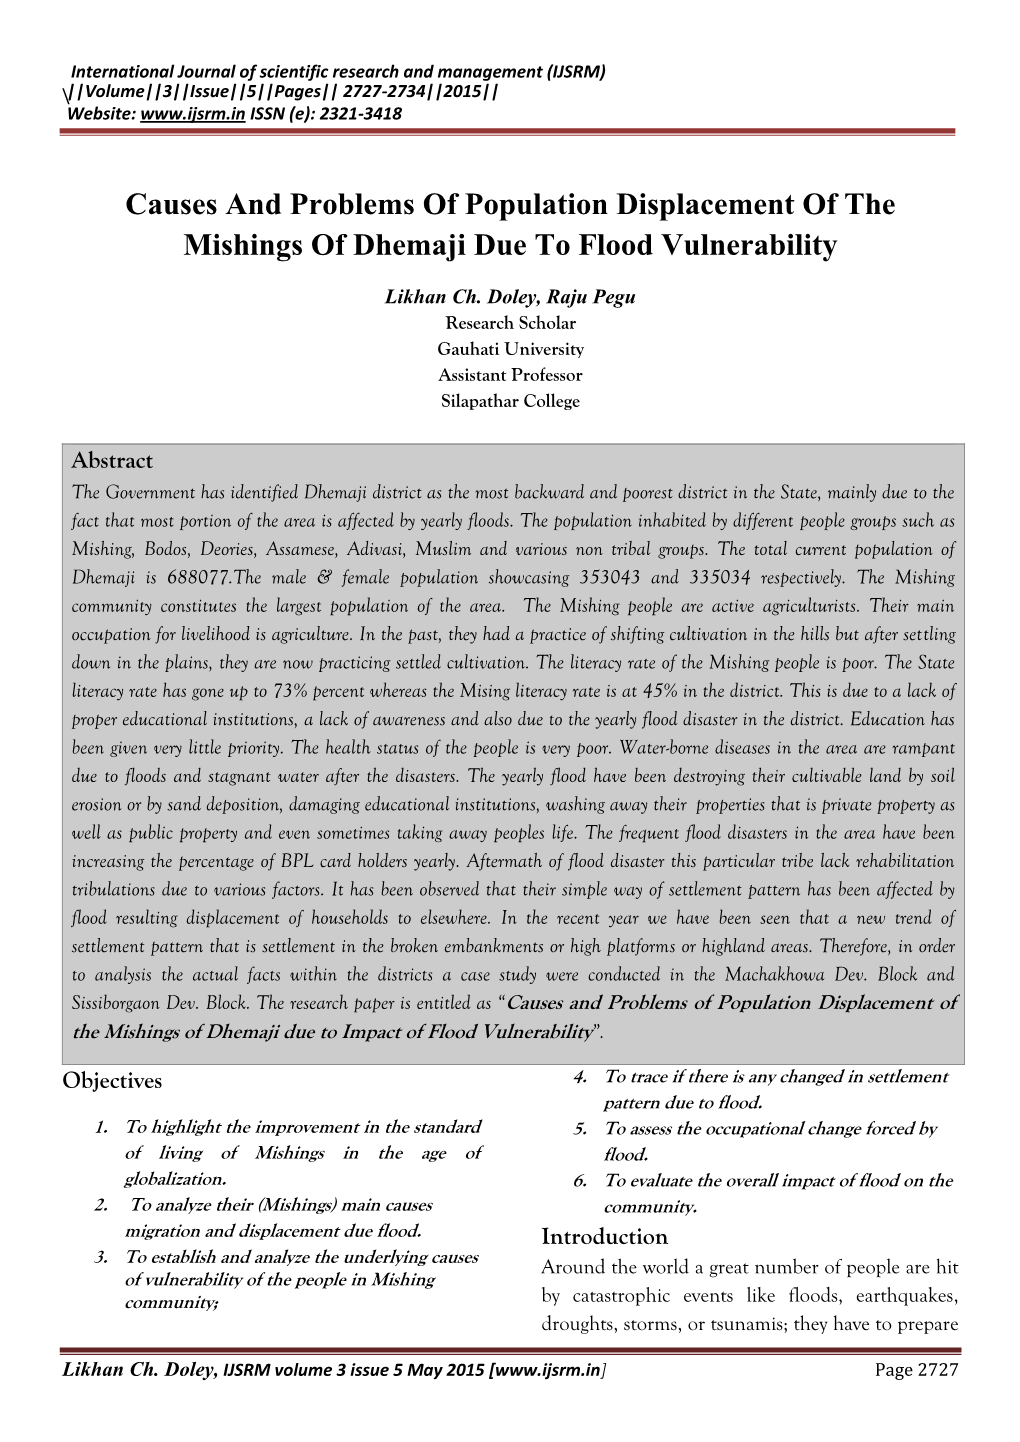 Causes and Problems of Population Displacement of the Mishings of Dhemaji Due to Flood Vulnerability